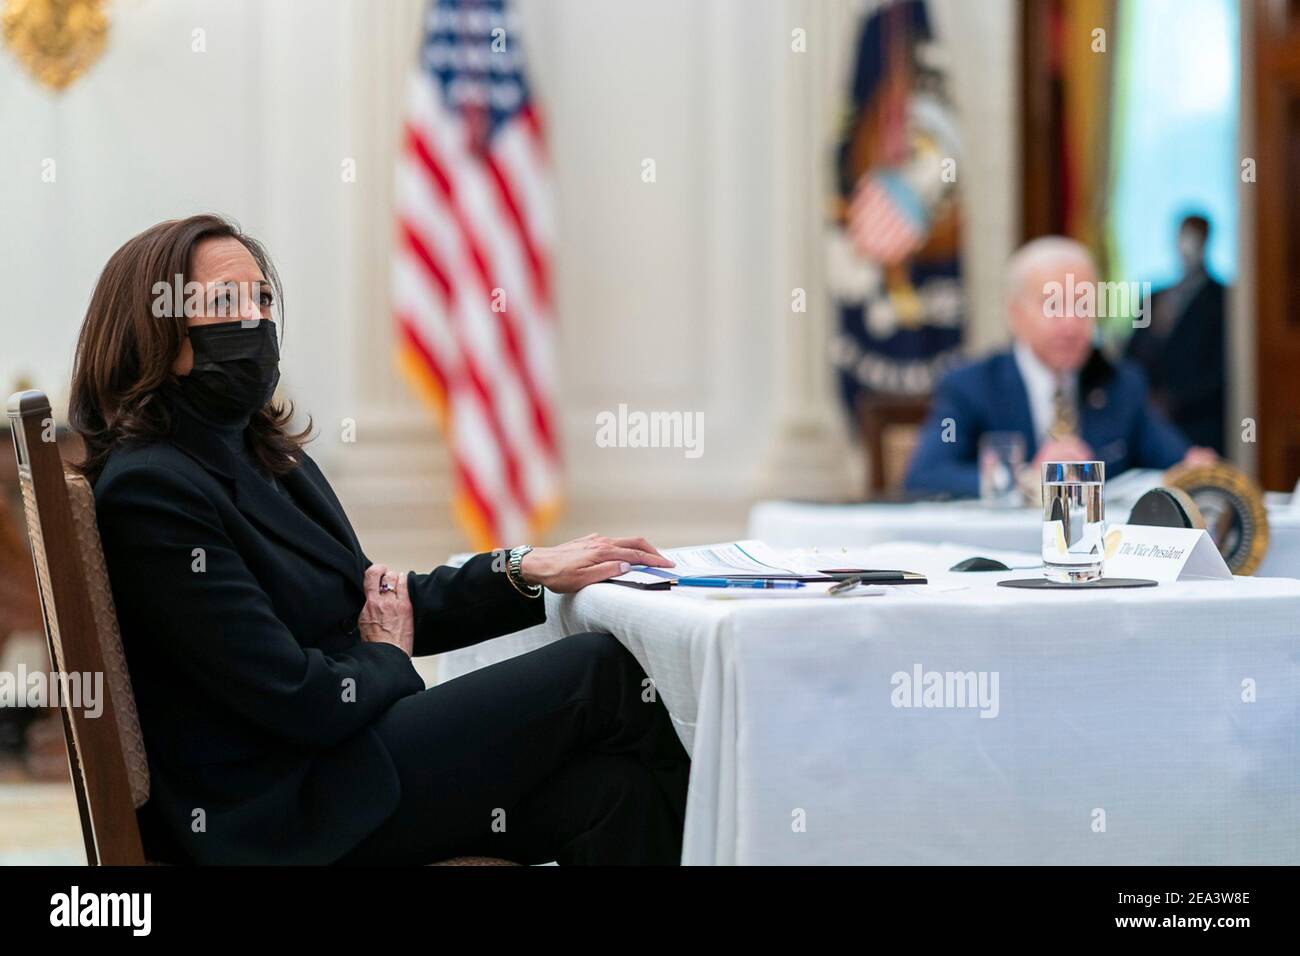 U.S President Joe Biden and Vice President Kamala Harris during a briefing on the economy in the State Dining Room of the White House January 22, 2021 in Washington, D.C. Stock Photo